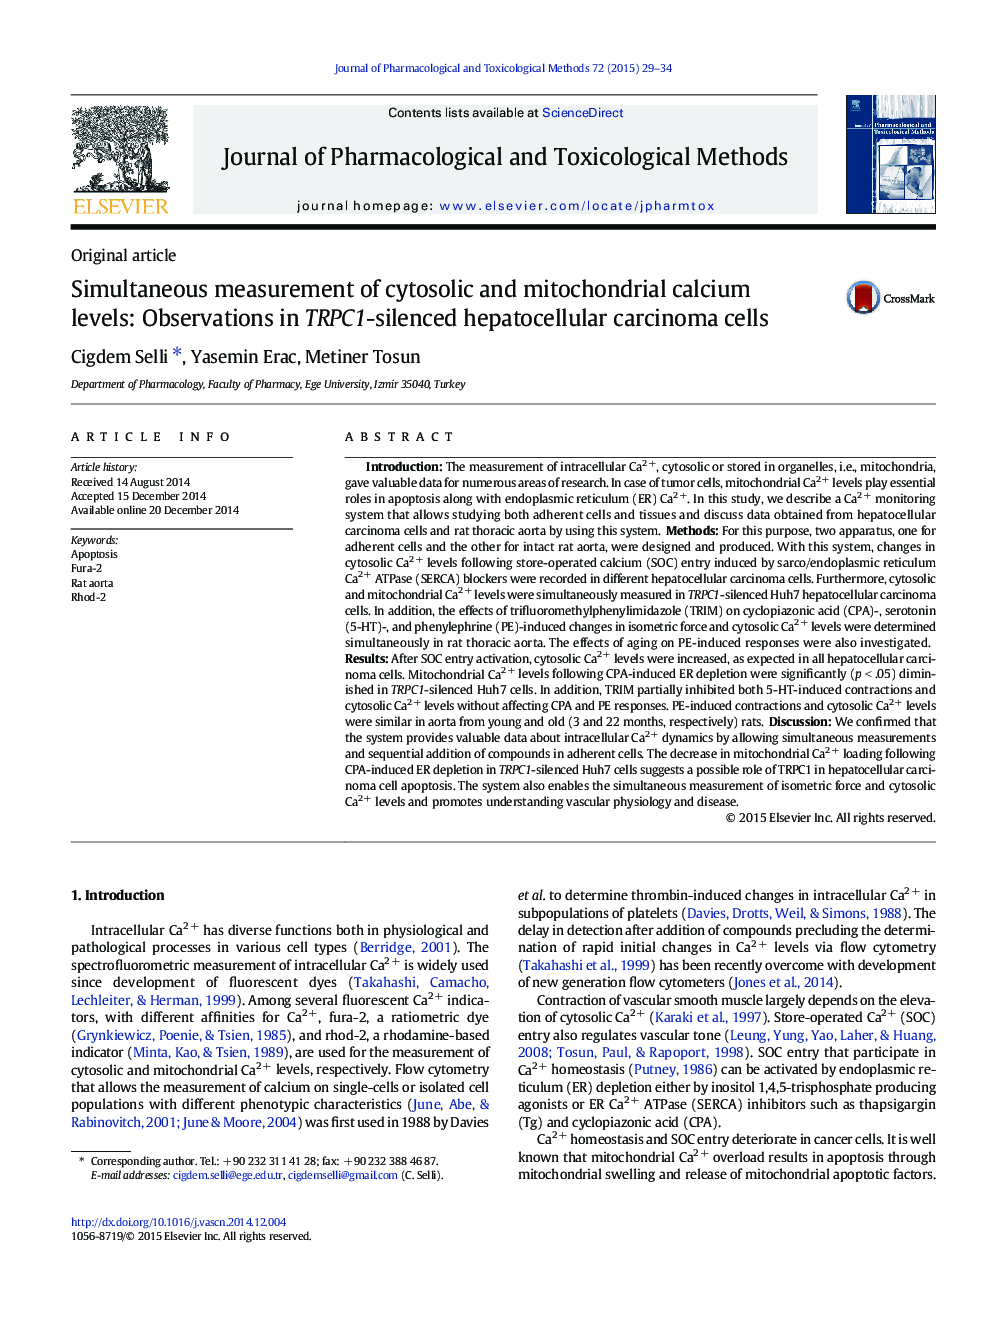 Simultaneous measurement of cytosolic and mitochondrial calcium levels: Observations in TRPC1-silenced hepatocellular carcinoma cells